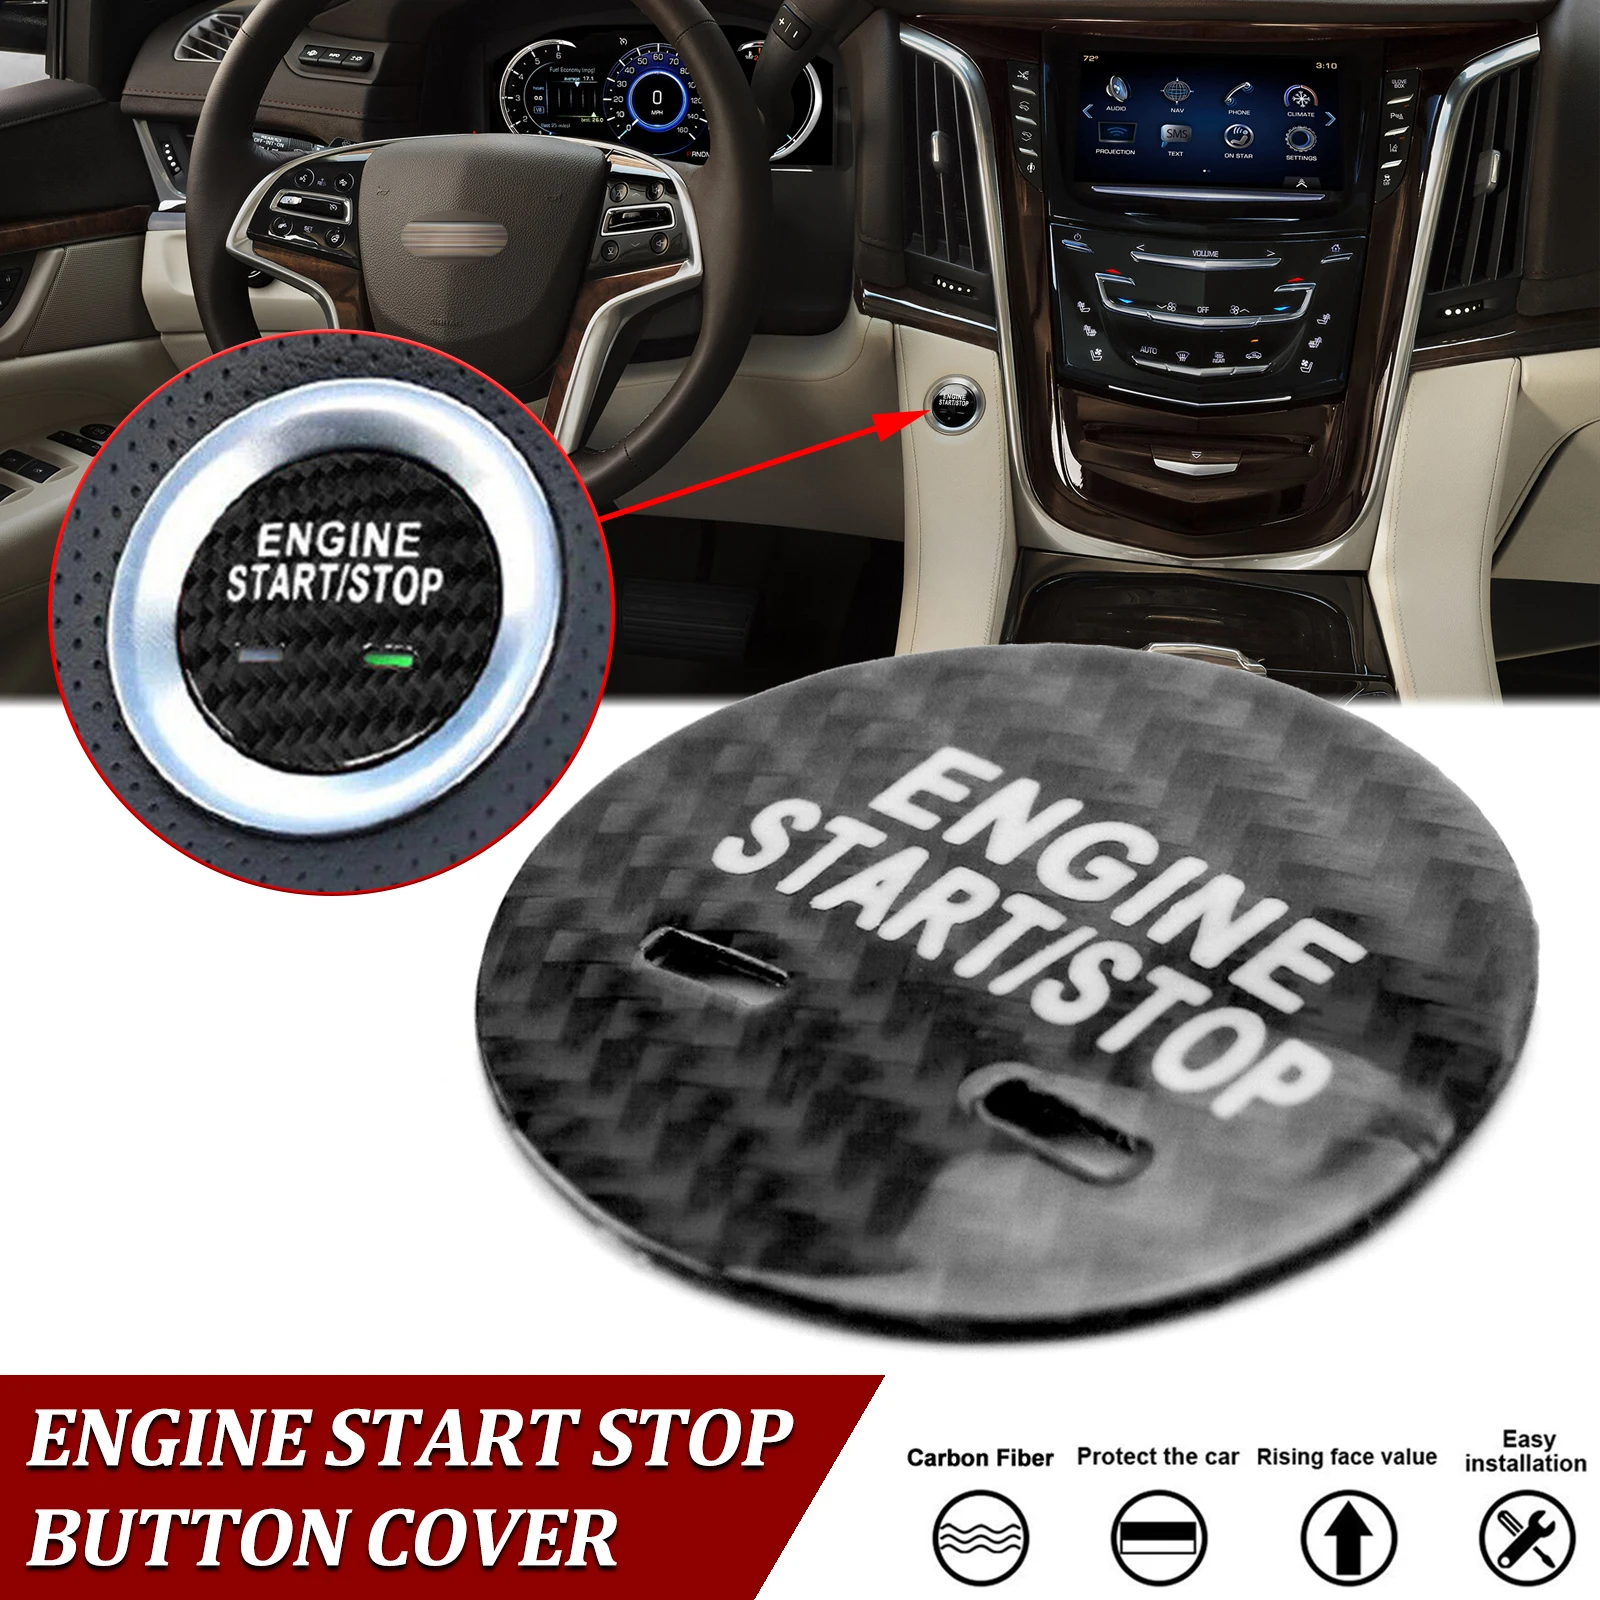 

Genuine Carbon Fiber Ignition Switch Engine Start/Stop Push Button Cover Sticker For Chevrolet Cruze Tahoe GMC Yukon Cadillac